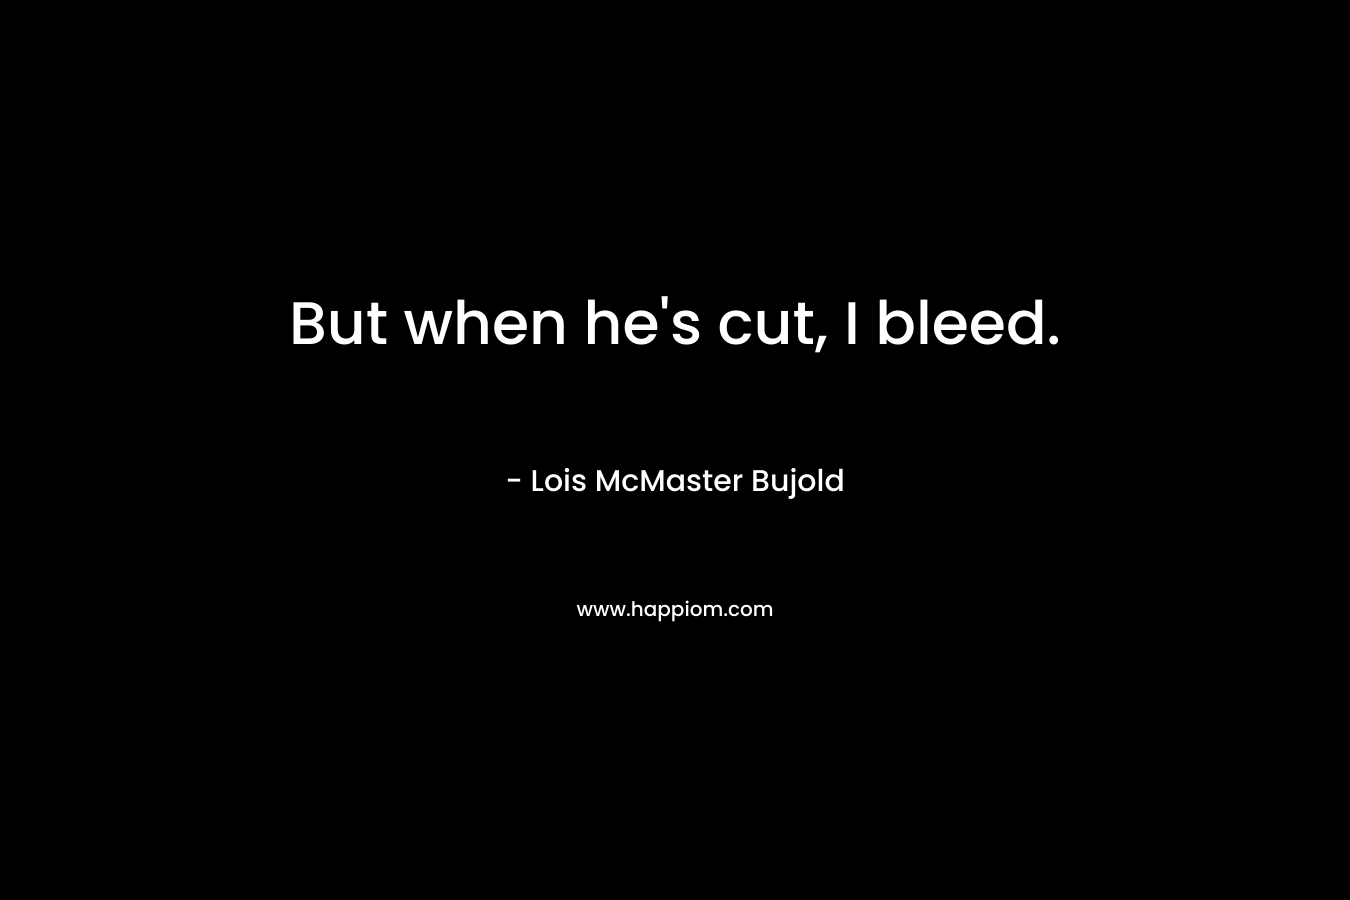 But when he’s cut, I bleed. – Lois McMaster Bujold